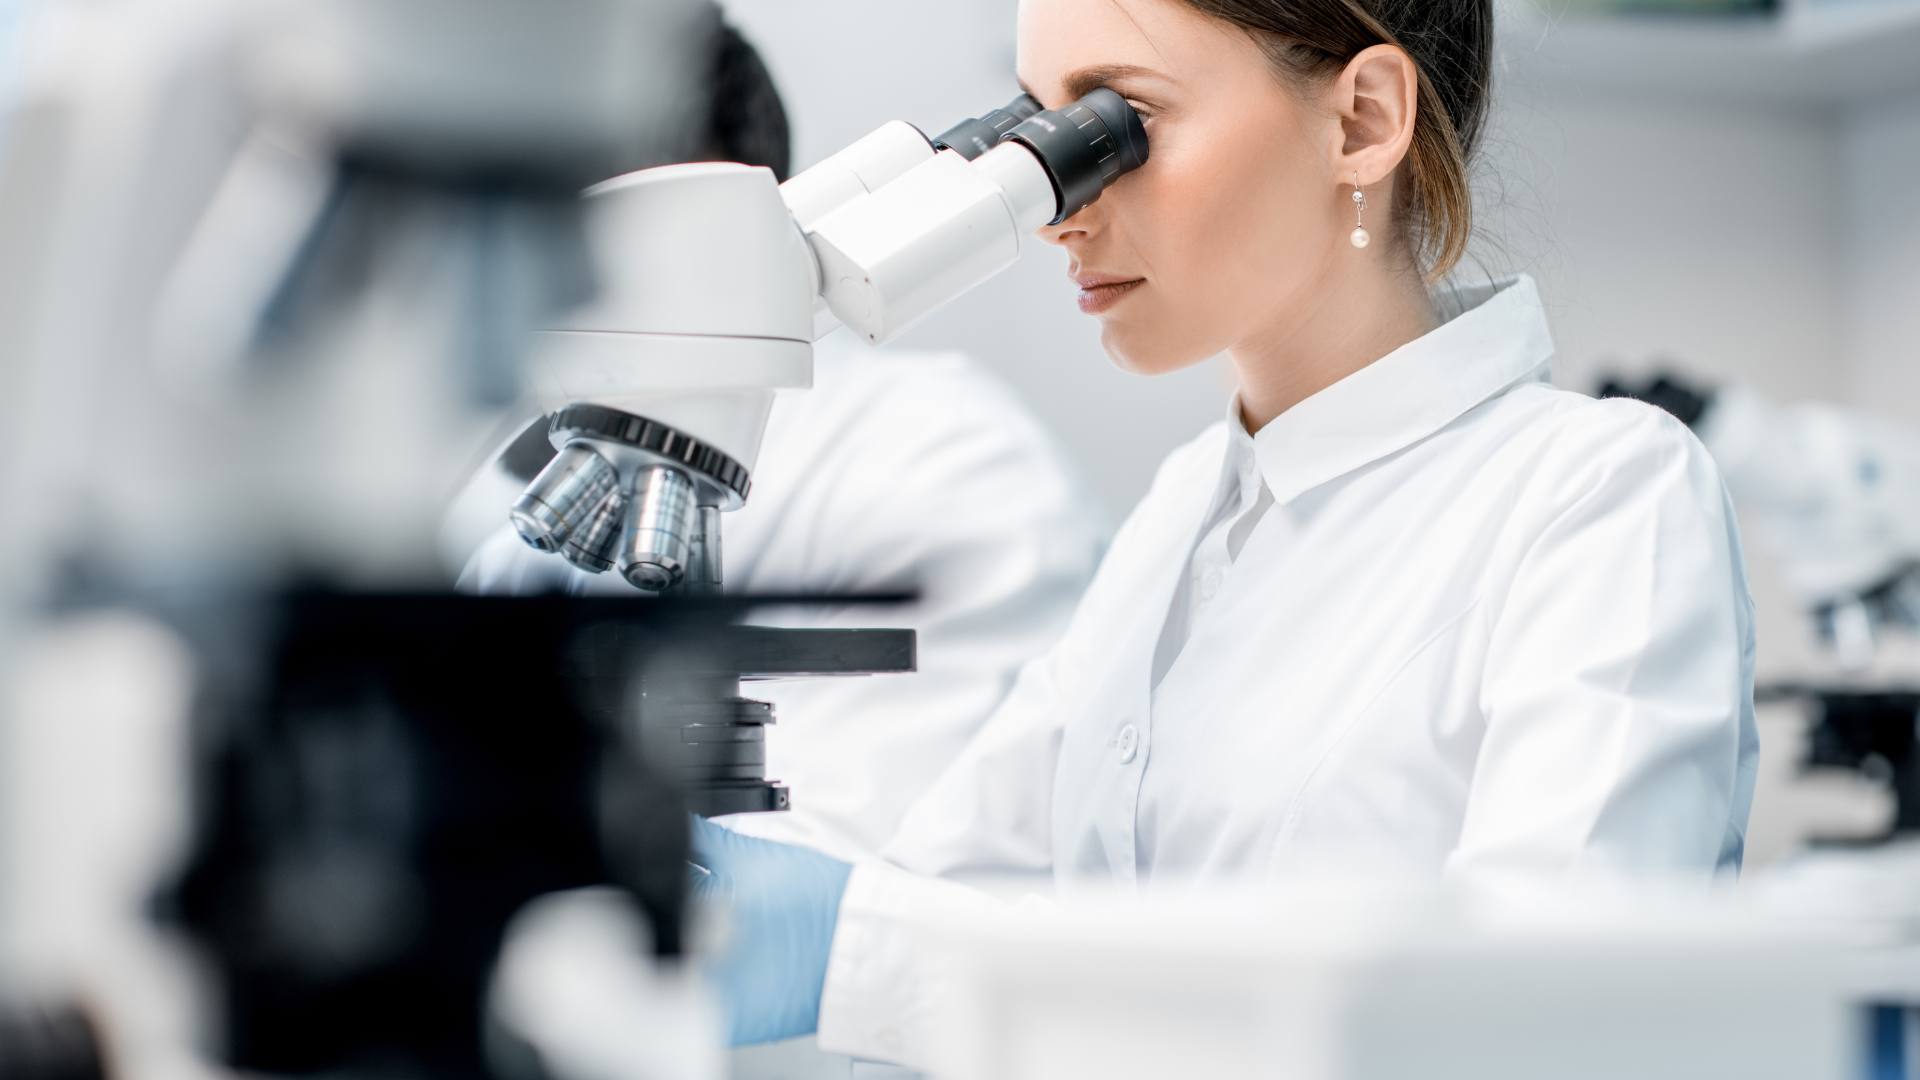 A med tech sits in a lab and looks through a microscope.